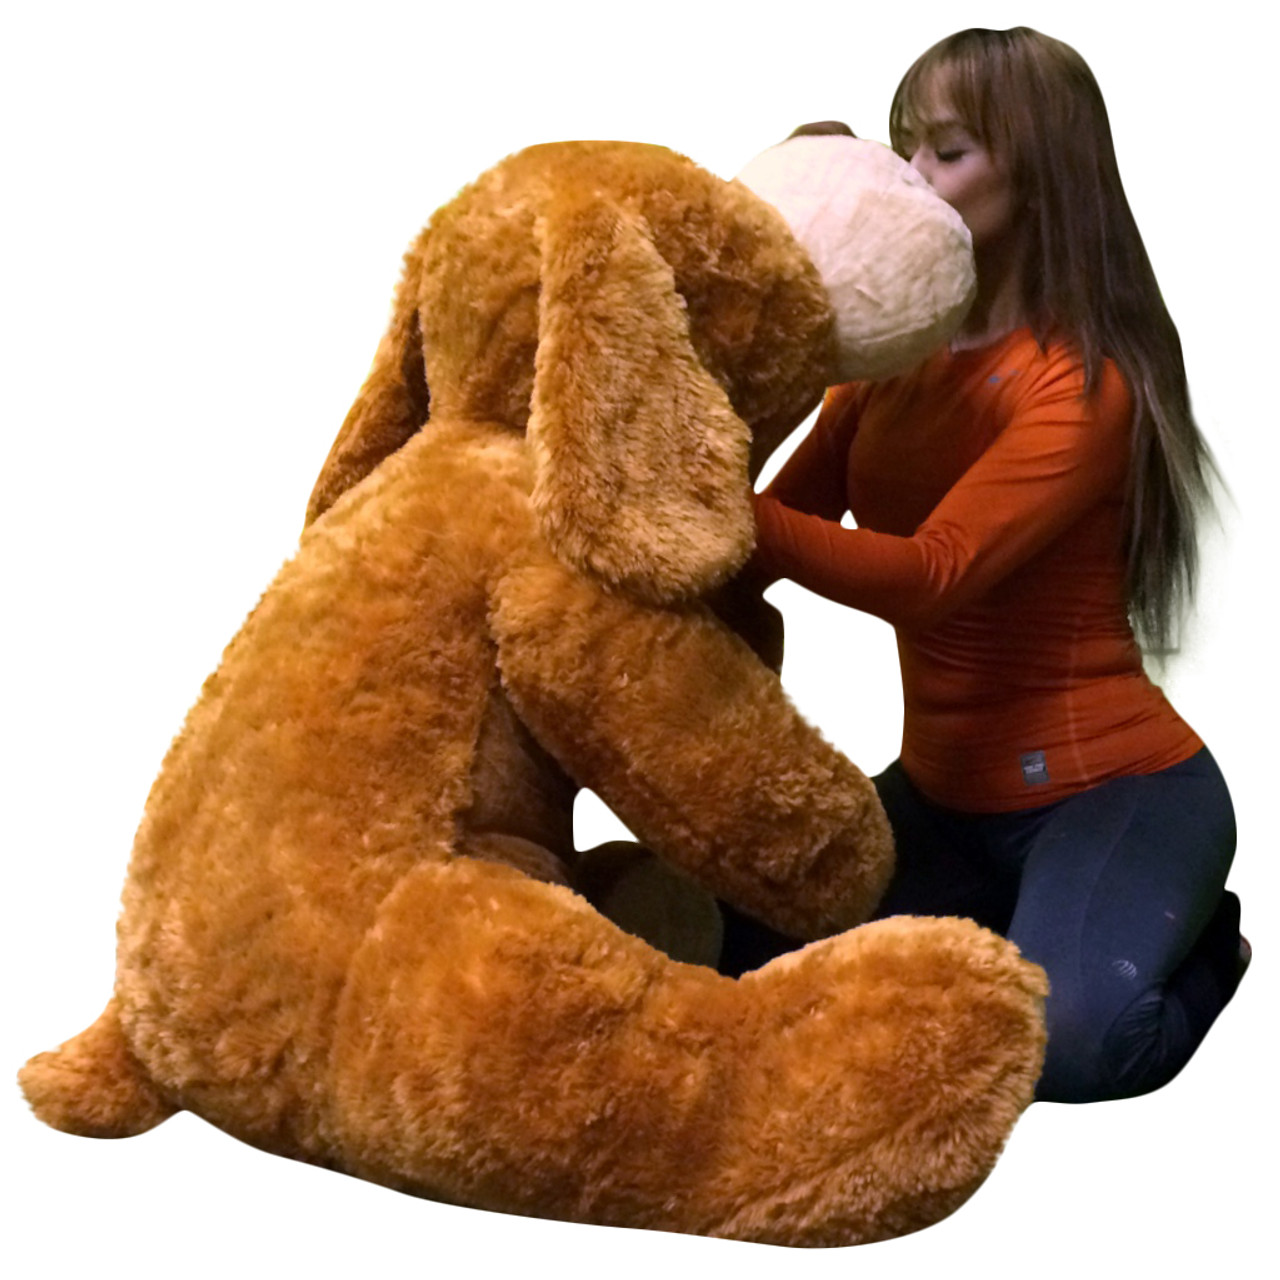 Giant Stuffed Puppy Dog 5 Feet Long Soft Extremely Large Plush Maroon Color 